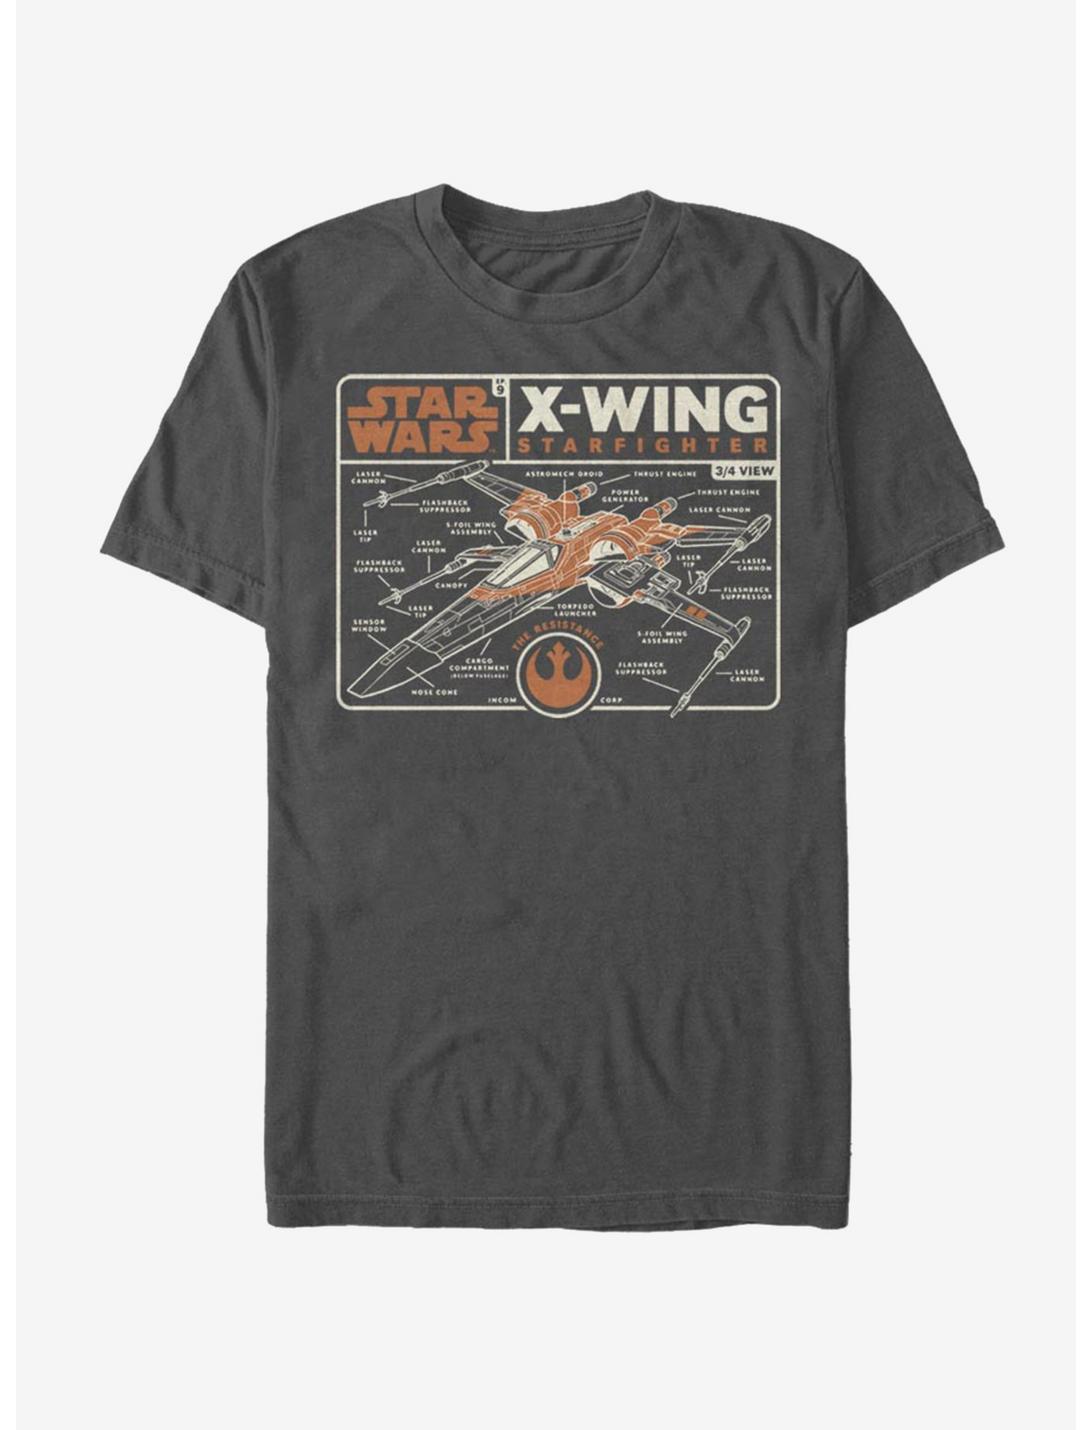 Star Wars: The Rise of Skywalker Starfighter Schematic T-Shirt, CHARCOAL, hi-res